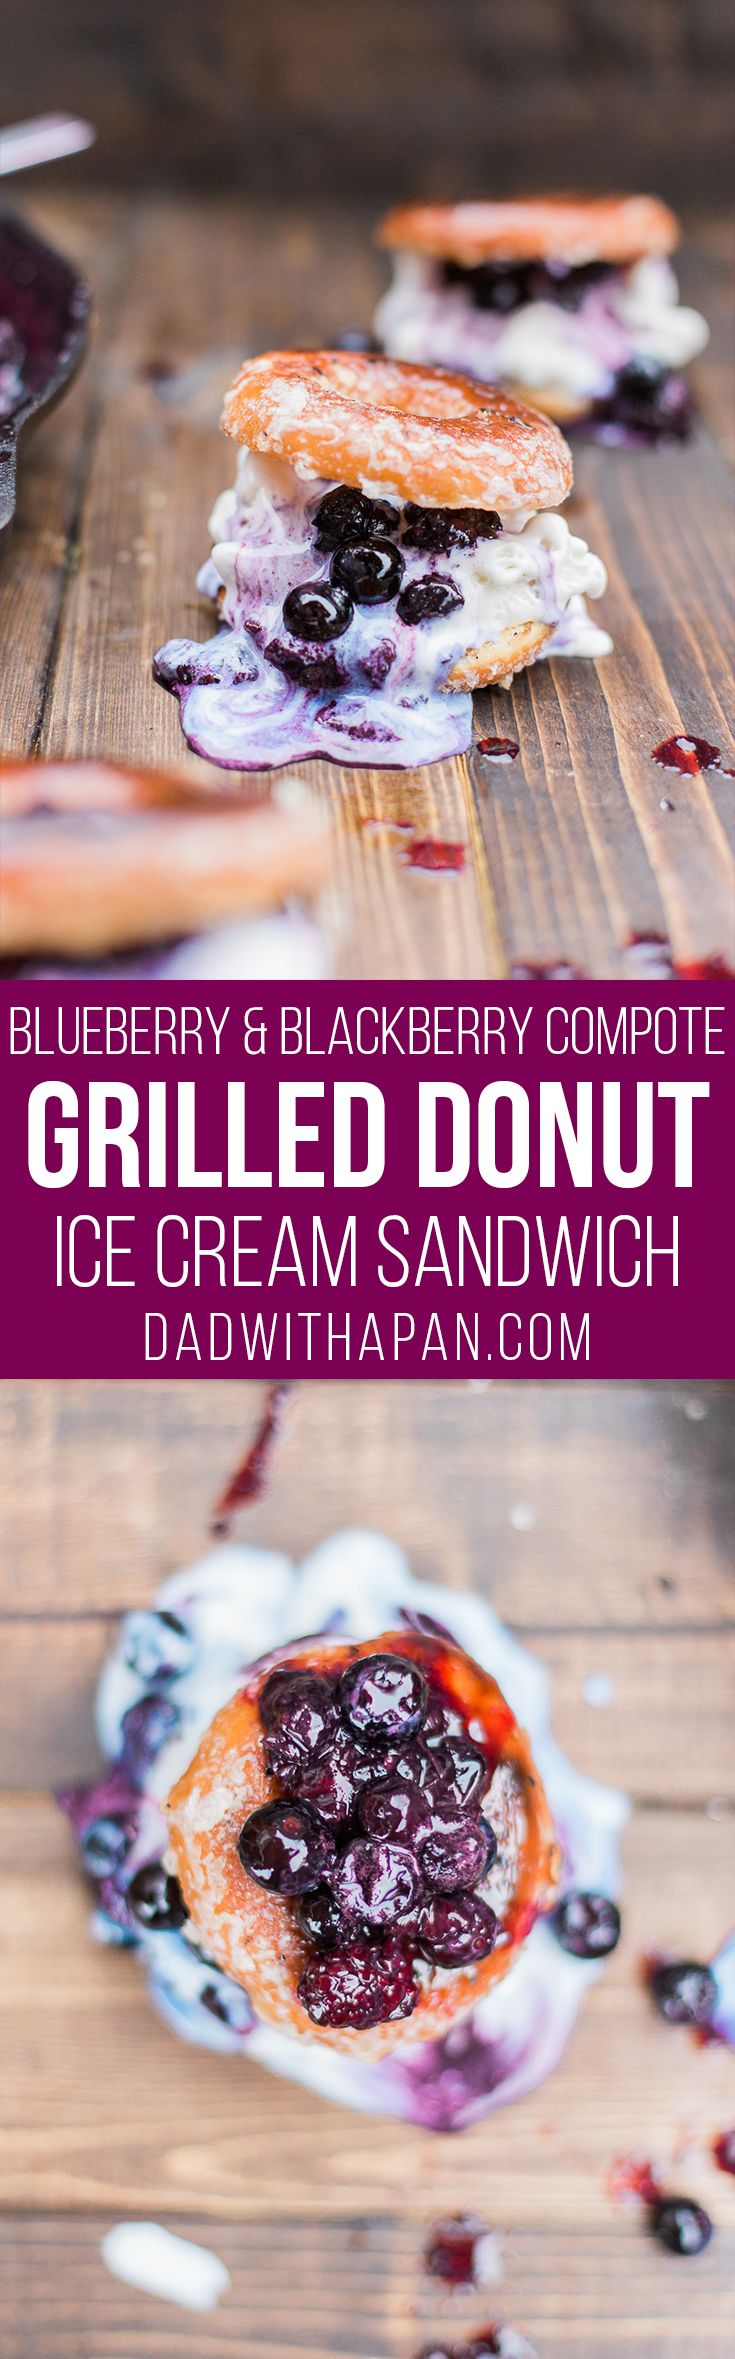 Grilled Donut Ice Cream Sandwich with a warm Blackberry Blueberry Sauce 